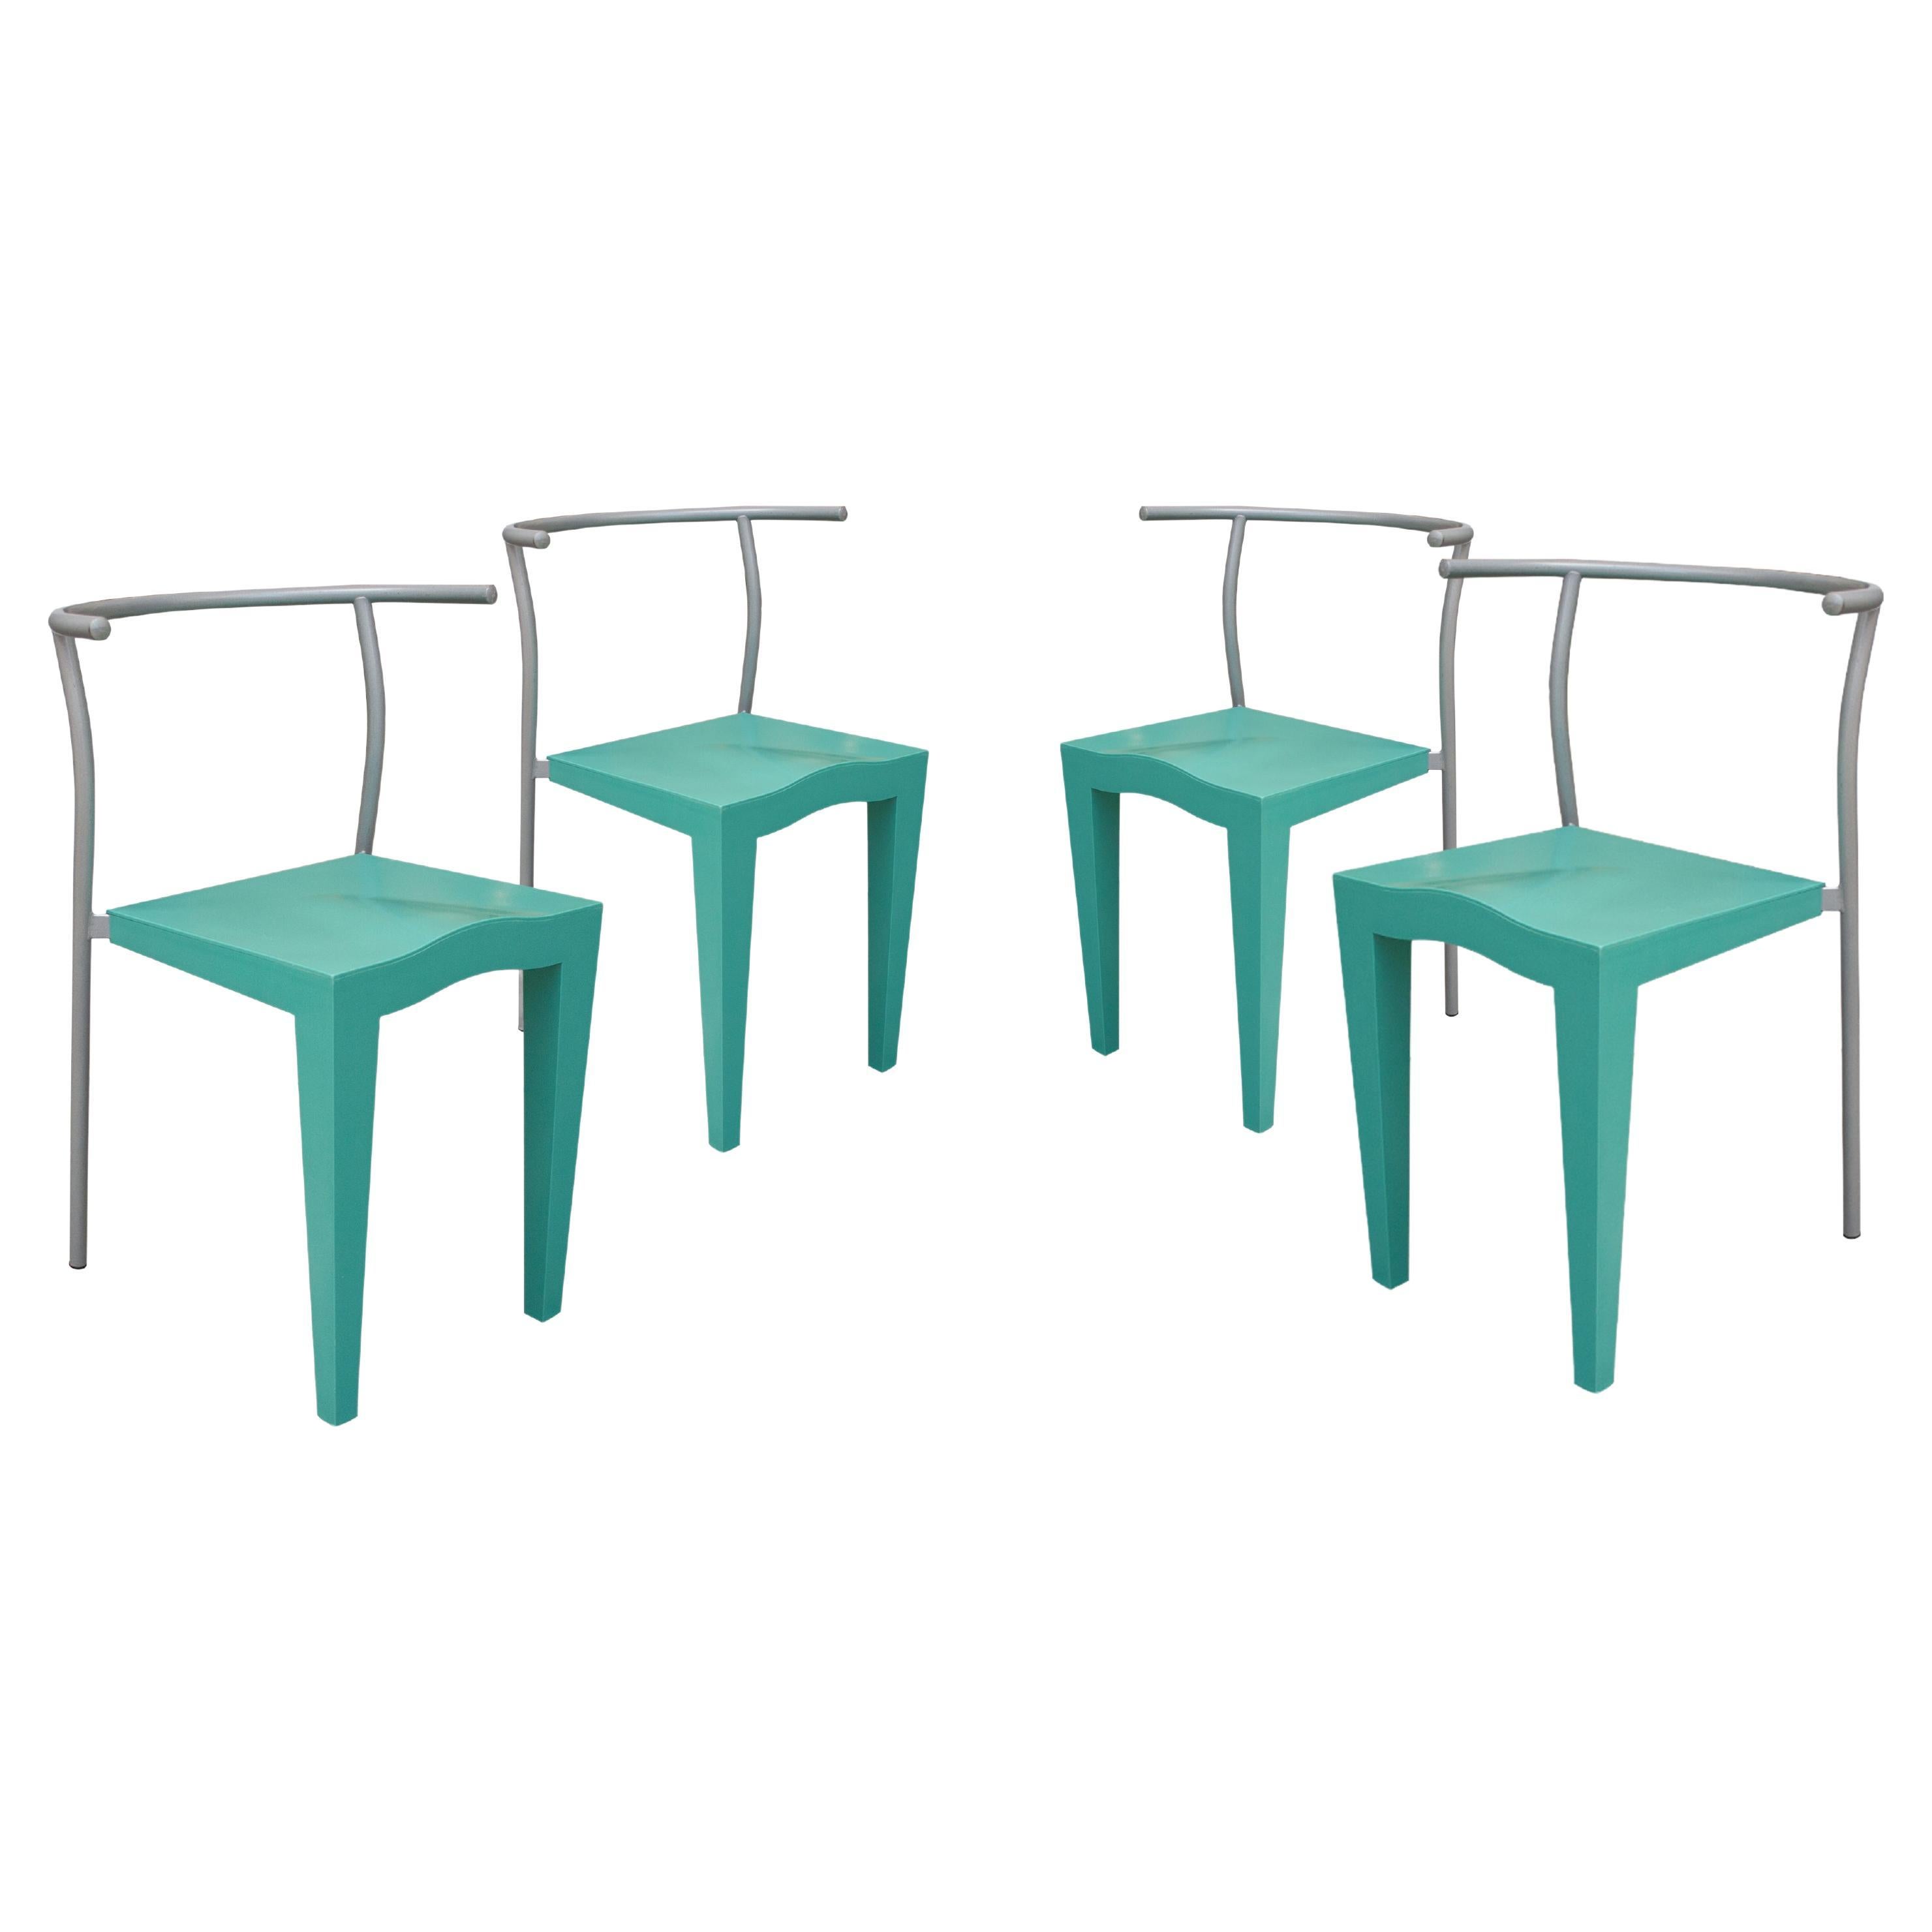 Phillippe Stark Dr.Glob Turquoise Set of Chairs, Italy, 1988 For Sale